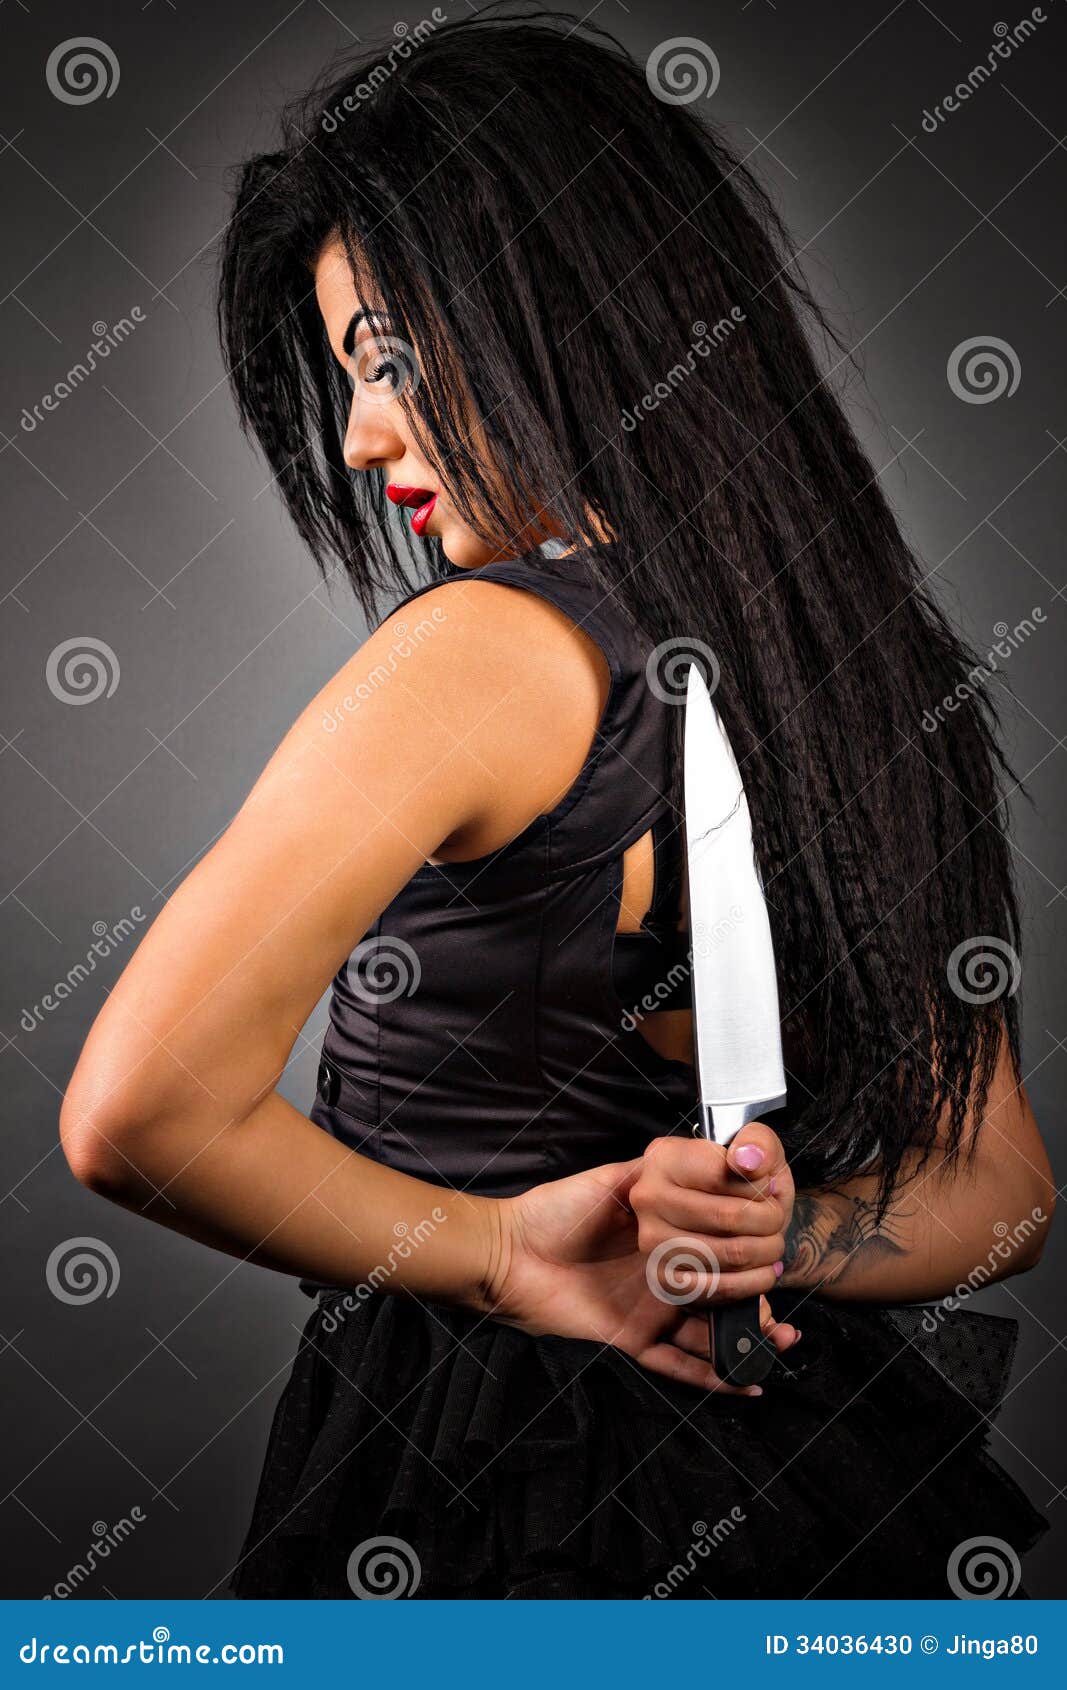 portrait of an expressive young woman holding a big knife to her